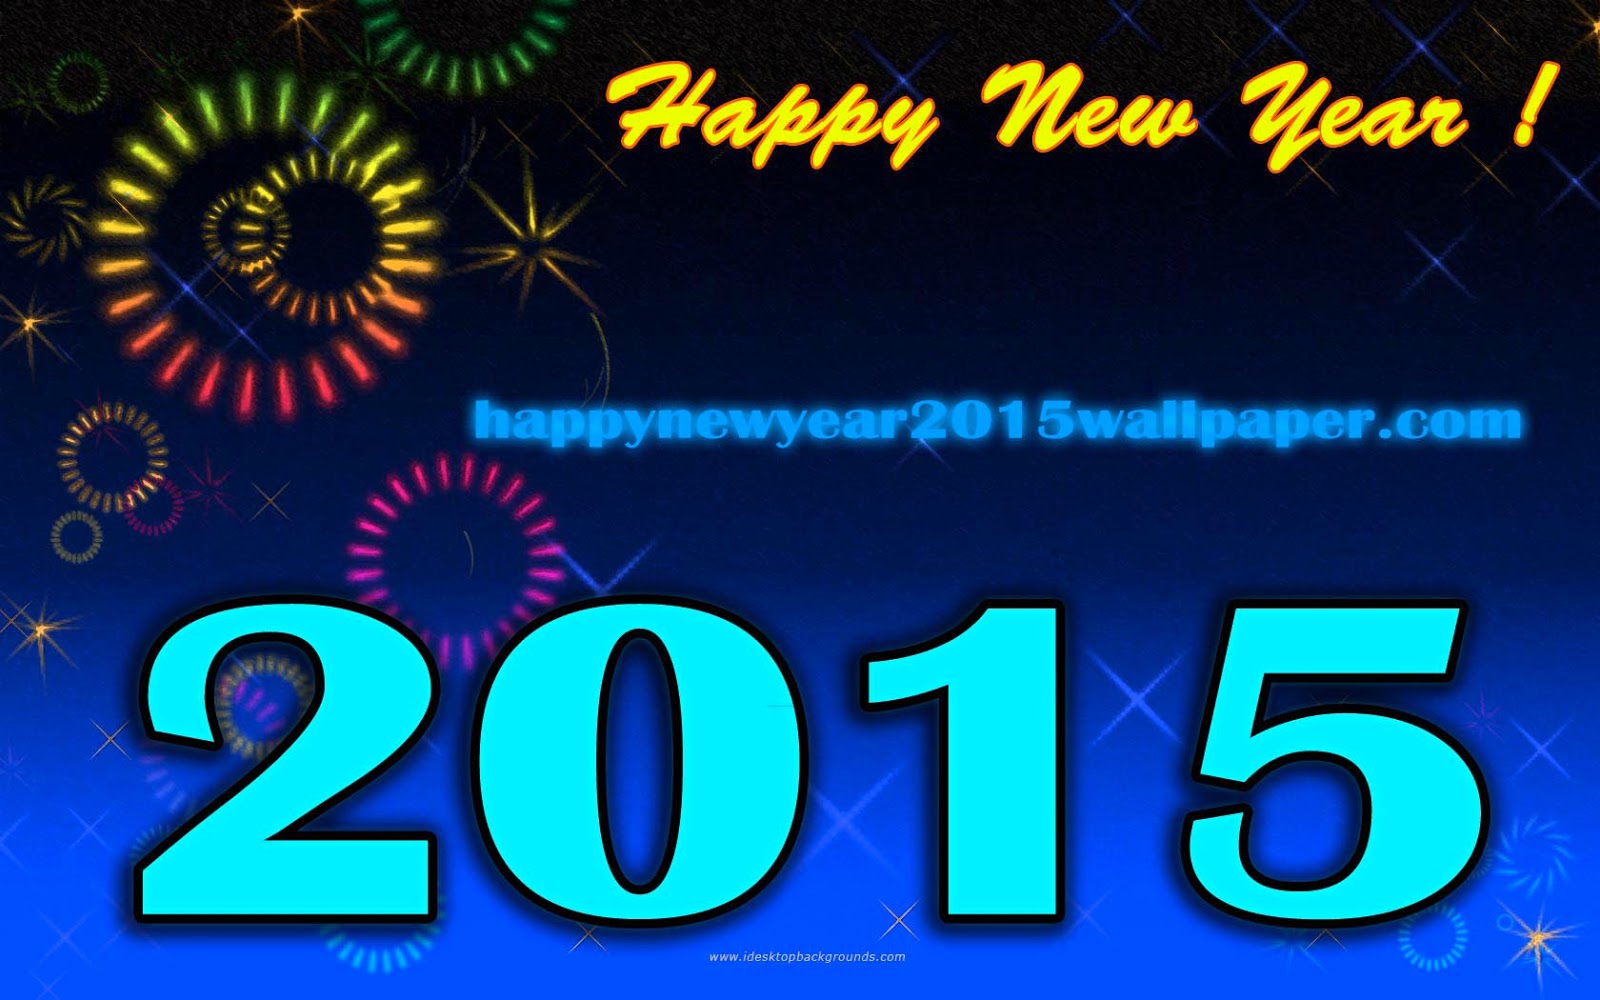 happy new year 2015 wallpaper for greetings Use these 2015 happy new